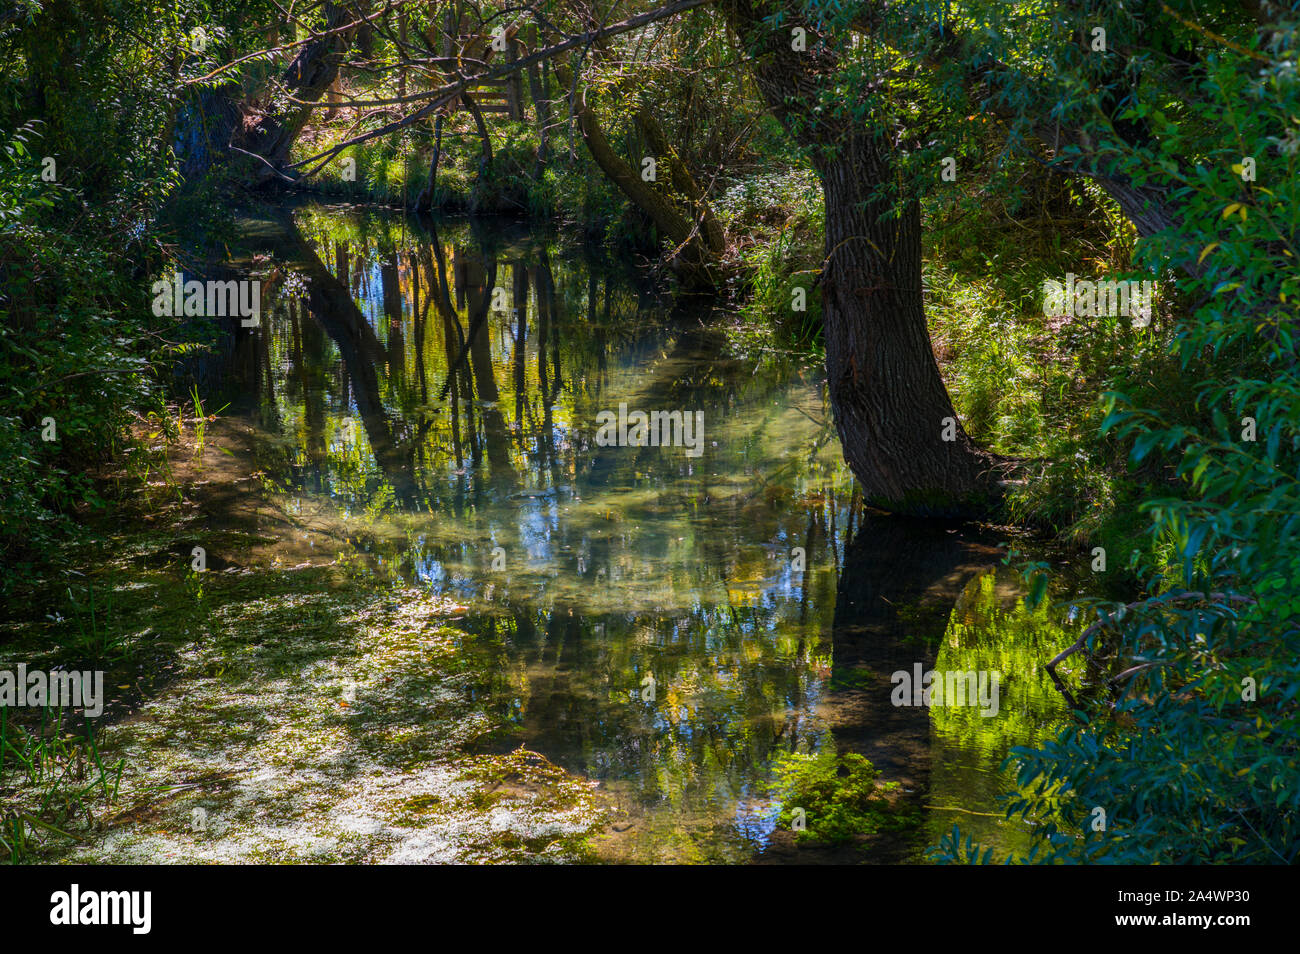 River and reflections on water. Stock Photo